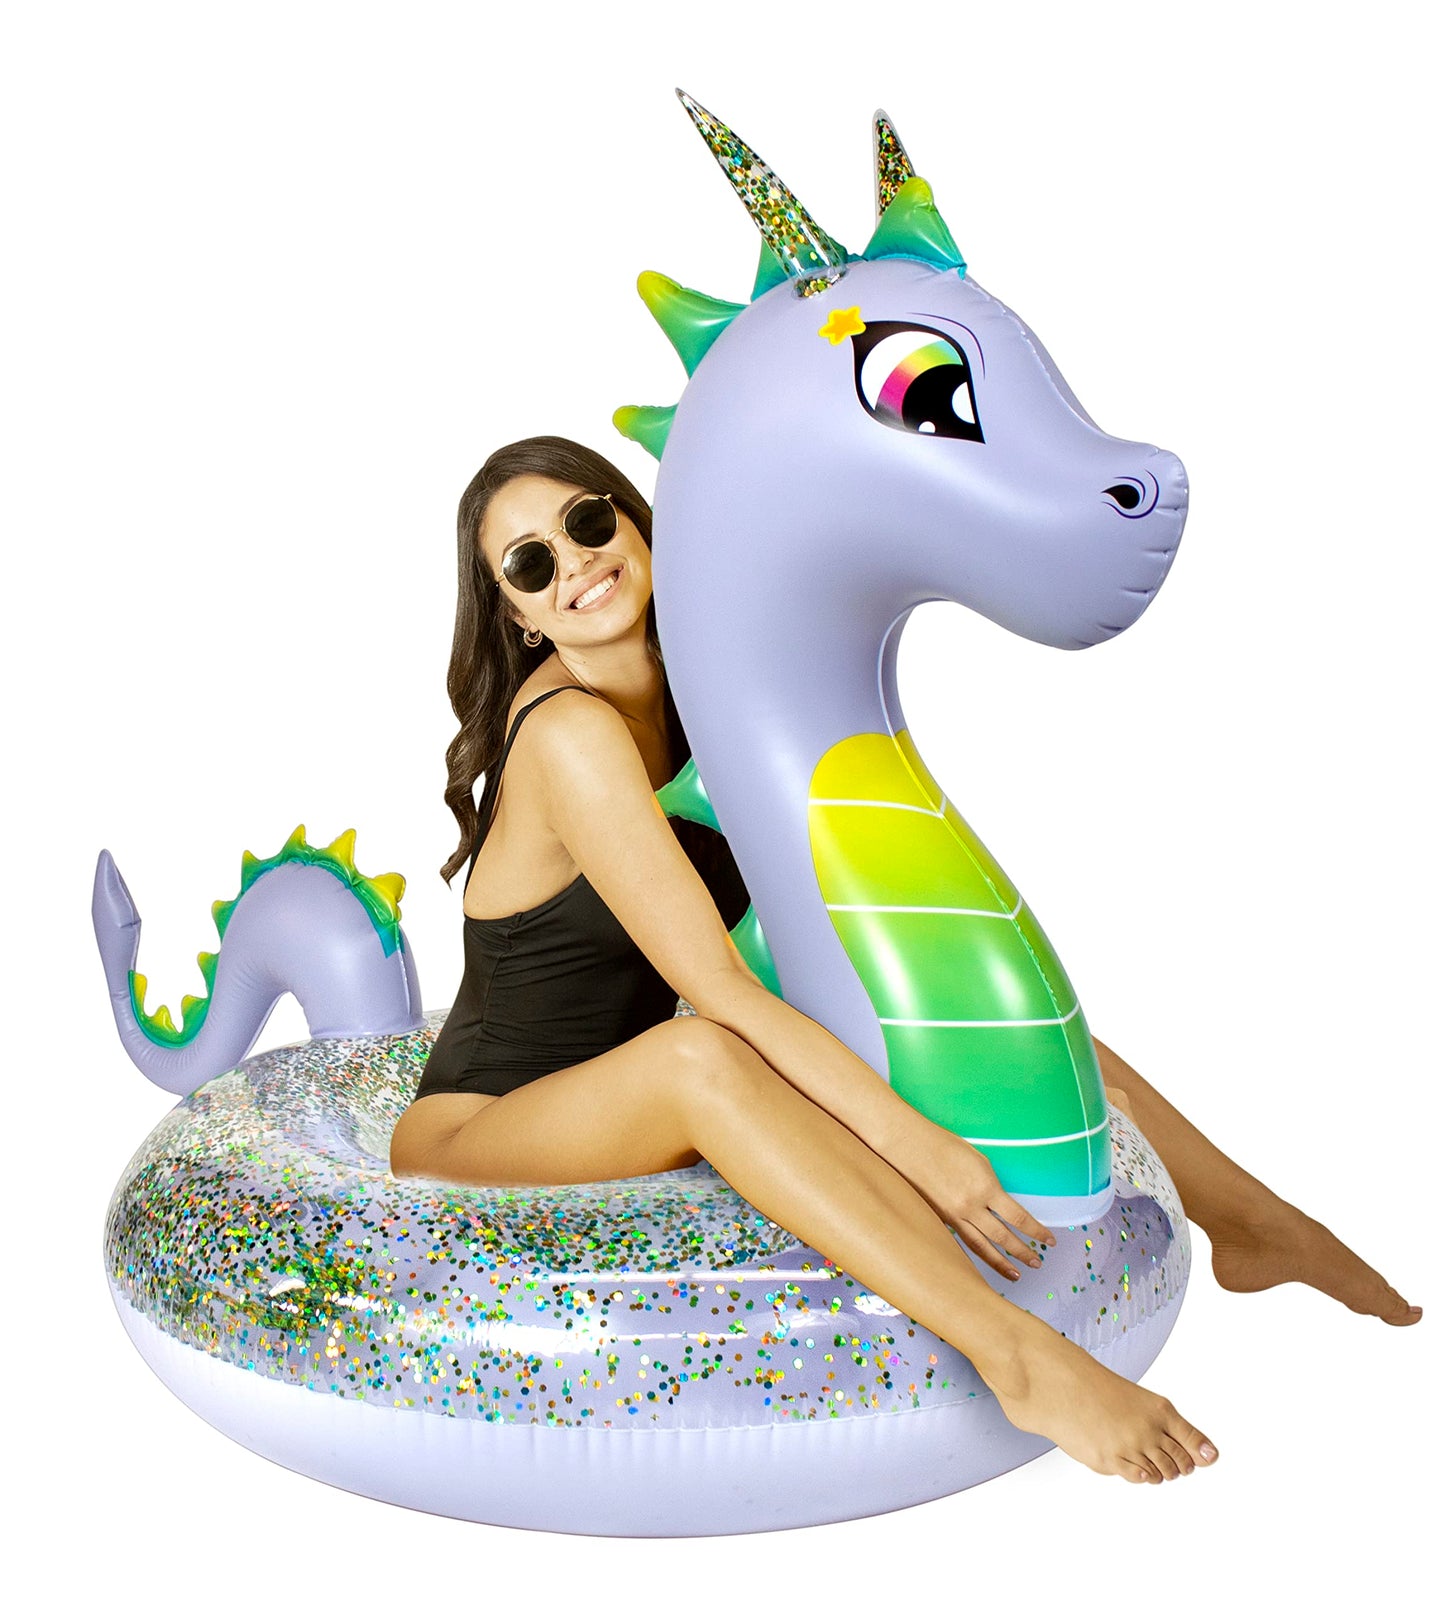 PoolCandy 40" Glitter Dragon Beach & Pool Tube, Filled with Multi Color Glitter. Large Tube Size Perfect for Kids and Adults in The Pool, Lake or Beach. Sparkling Holographic Color Changing Glitter